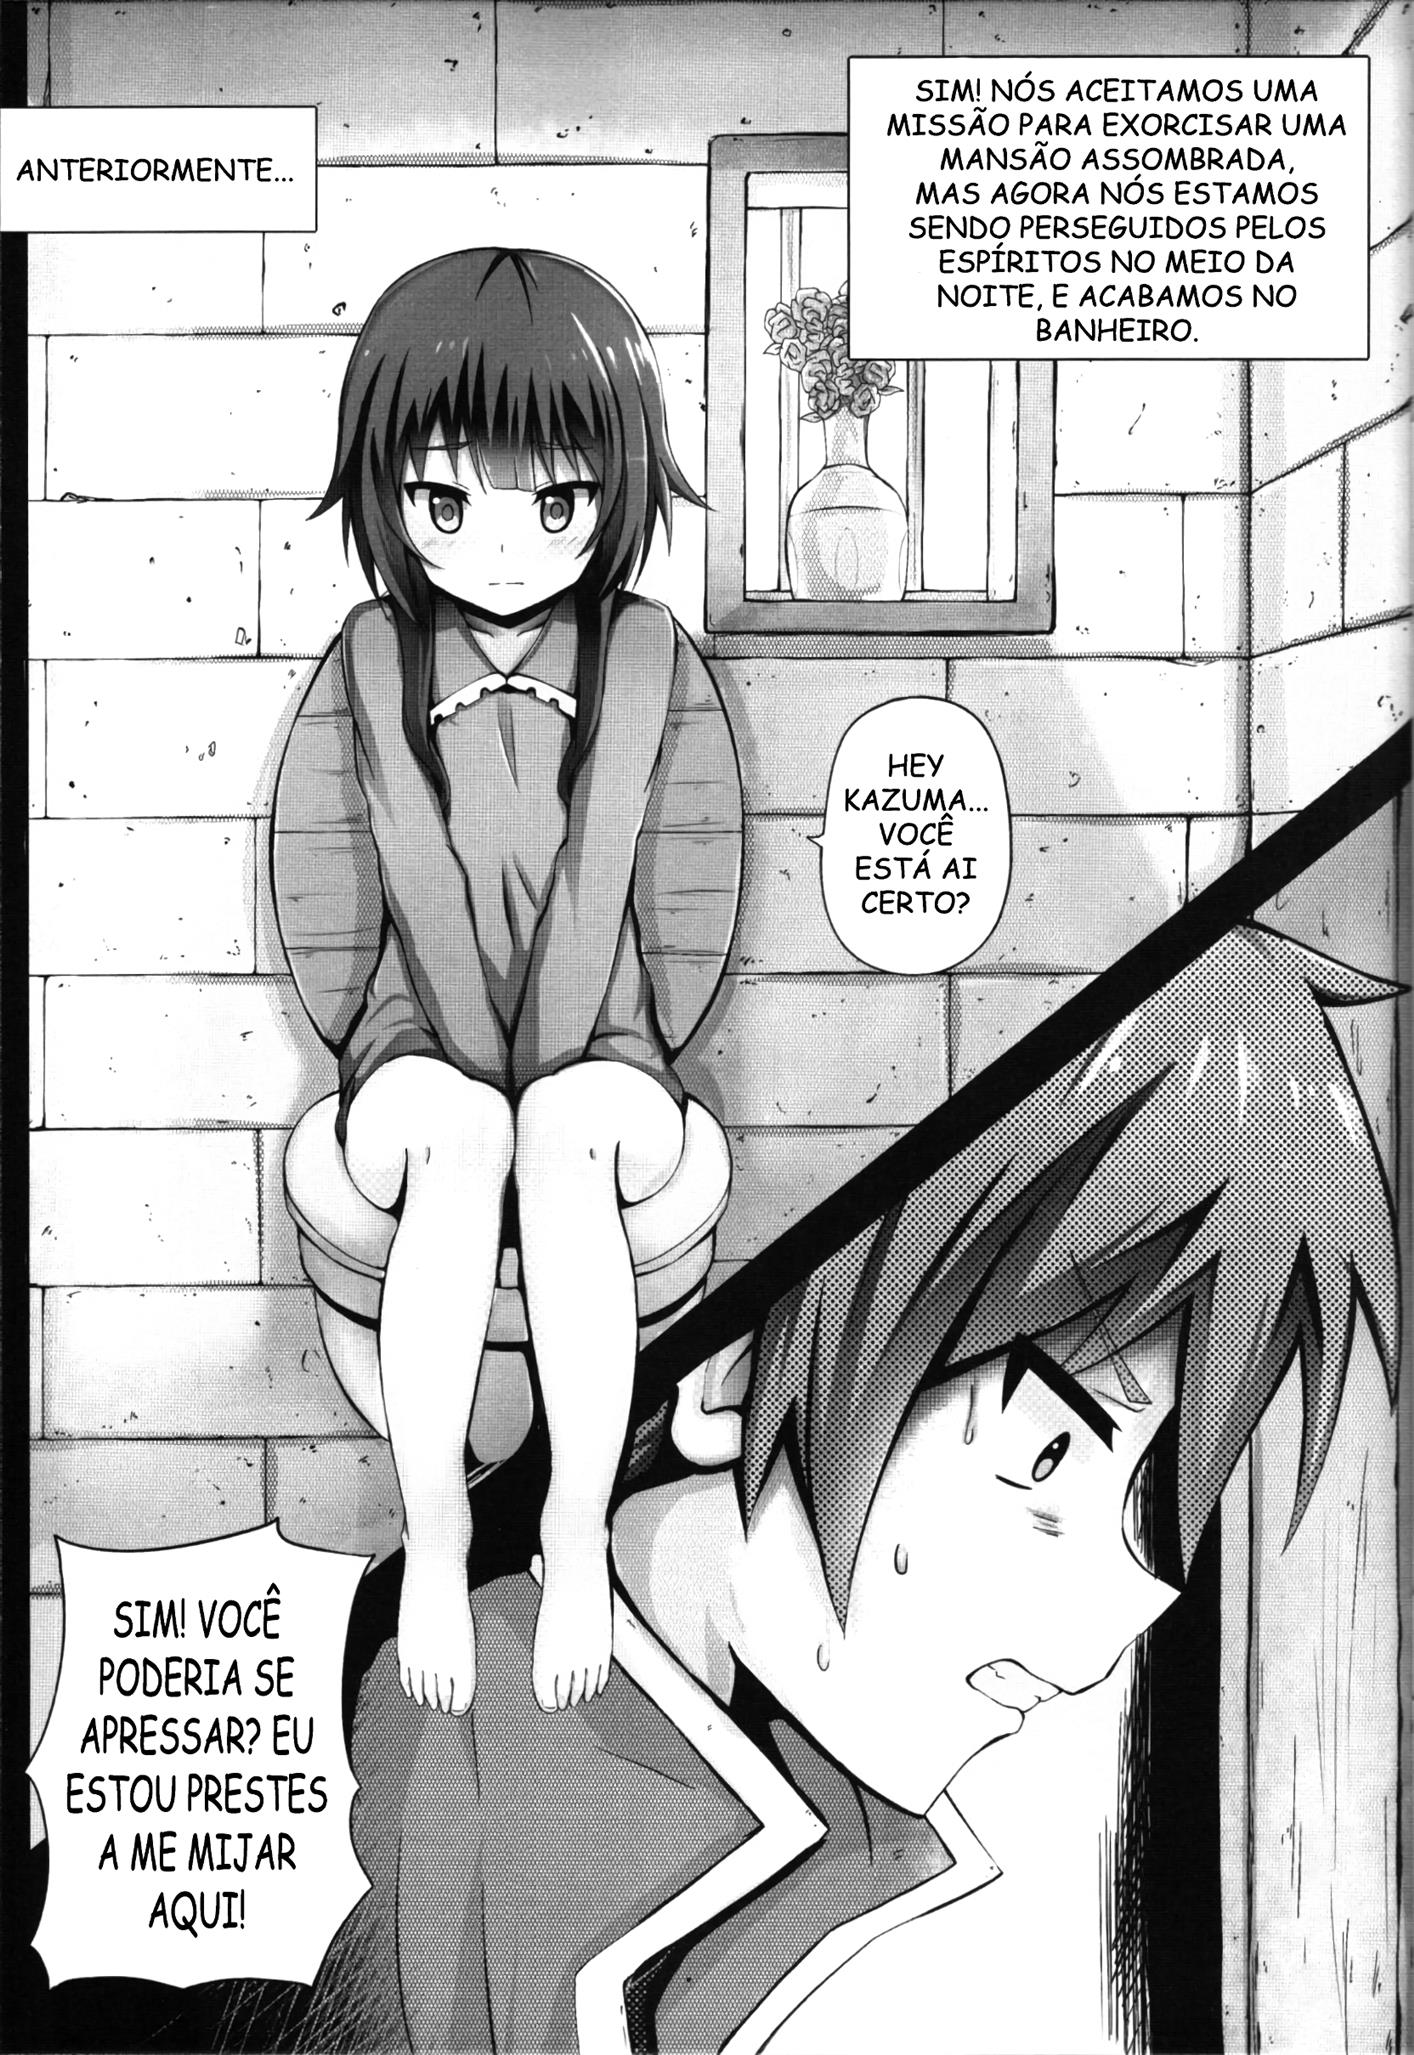 Giving ○○ to Megumin in the Toilet!